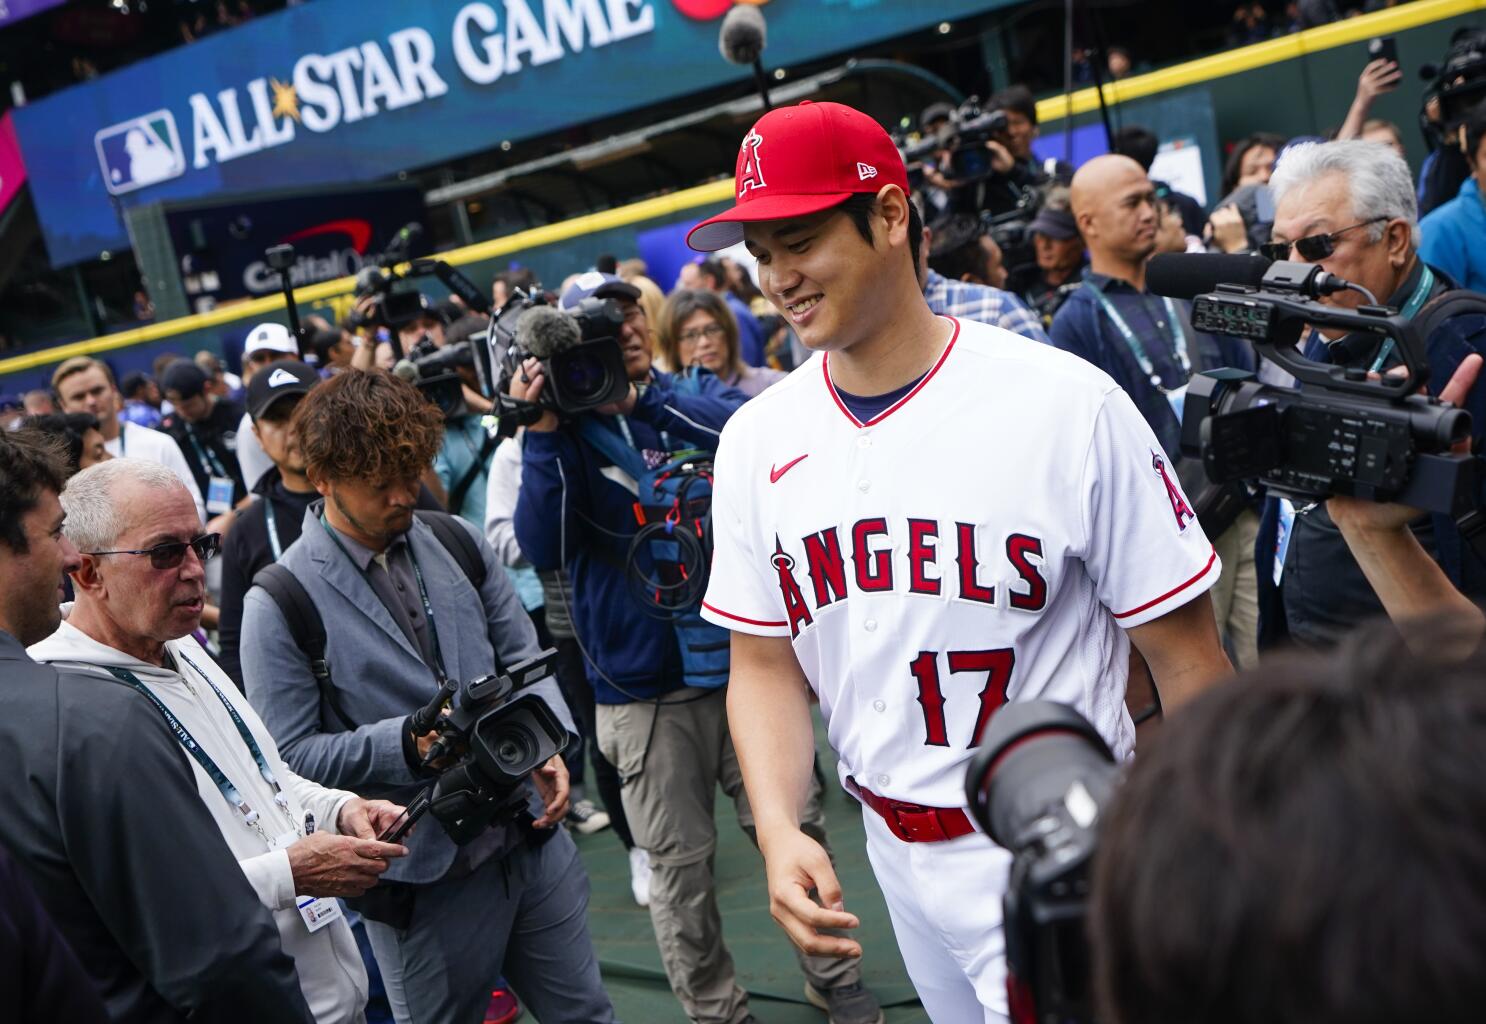 Even Closer Scrutiny for the Red Sox's Matsuzaka - The New York Times